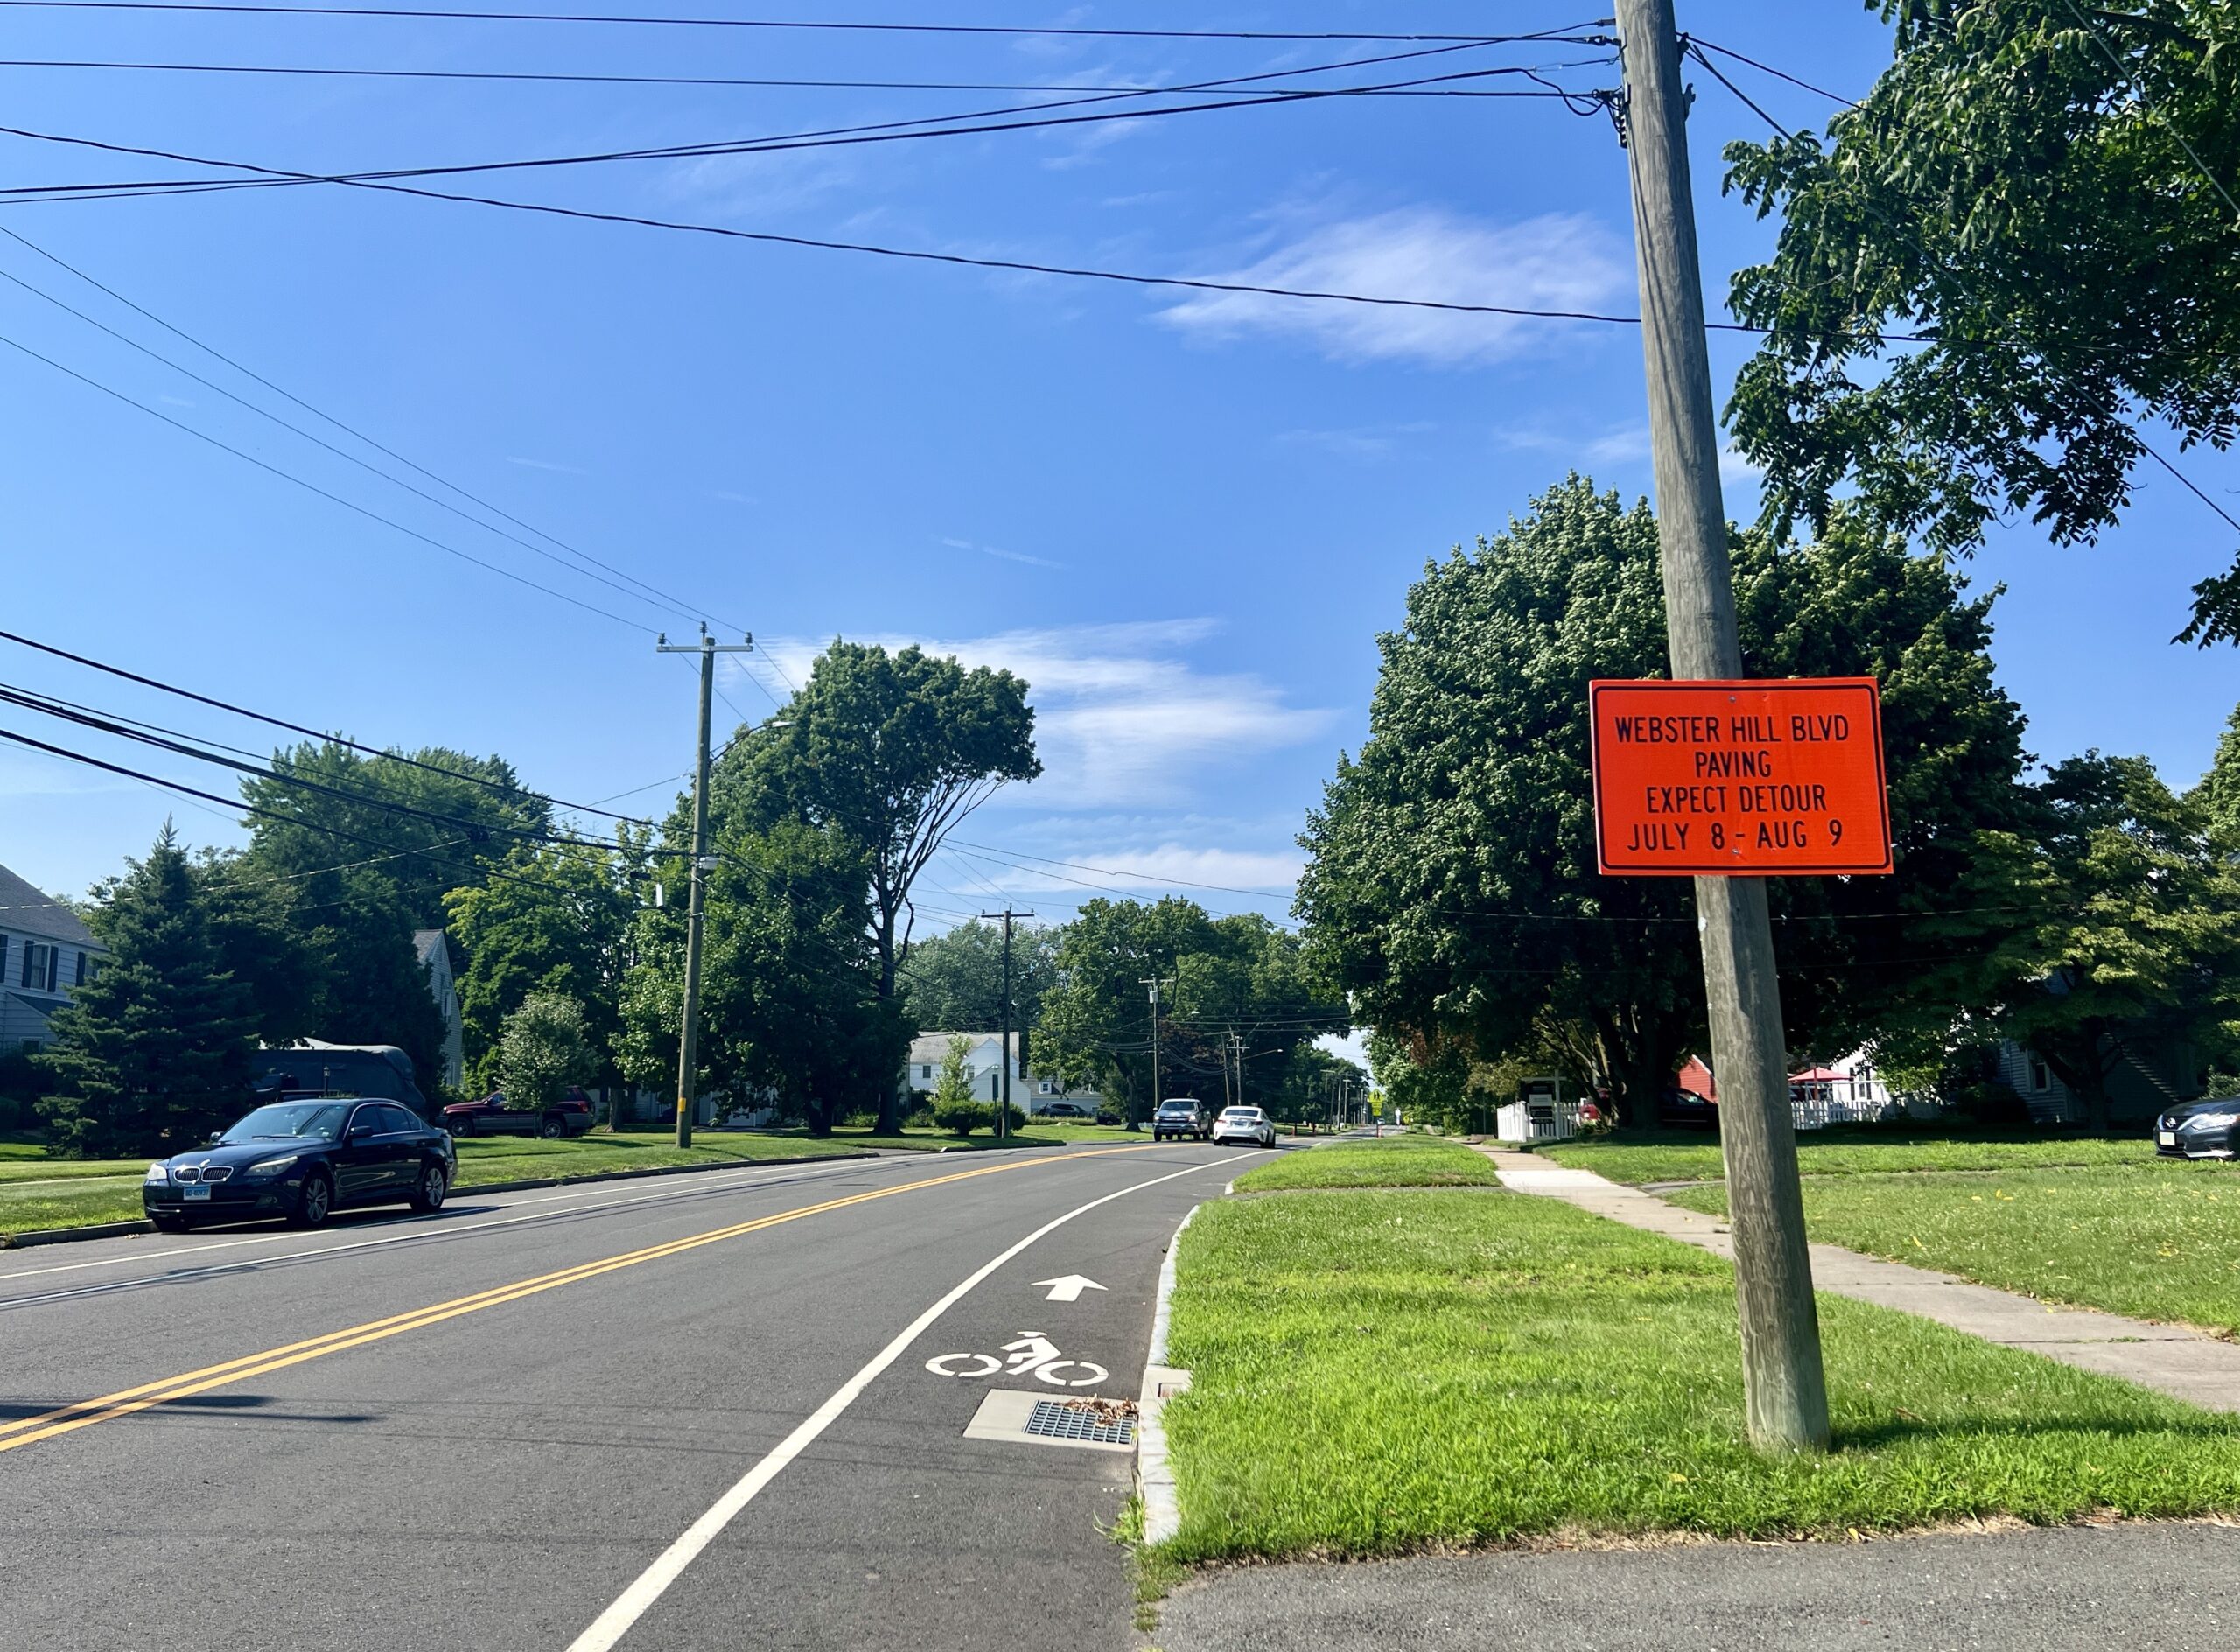 Second round of West Hartford Road resurfacing and other updates announced – We-Ha